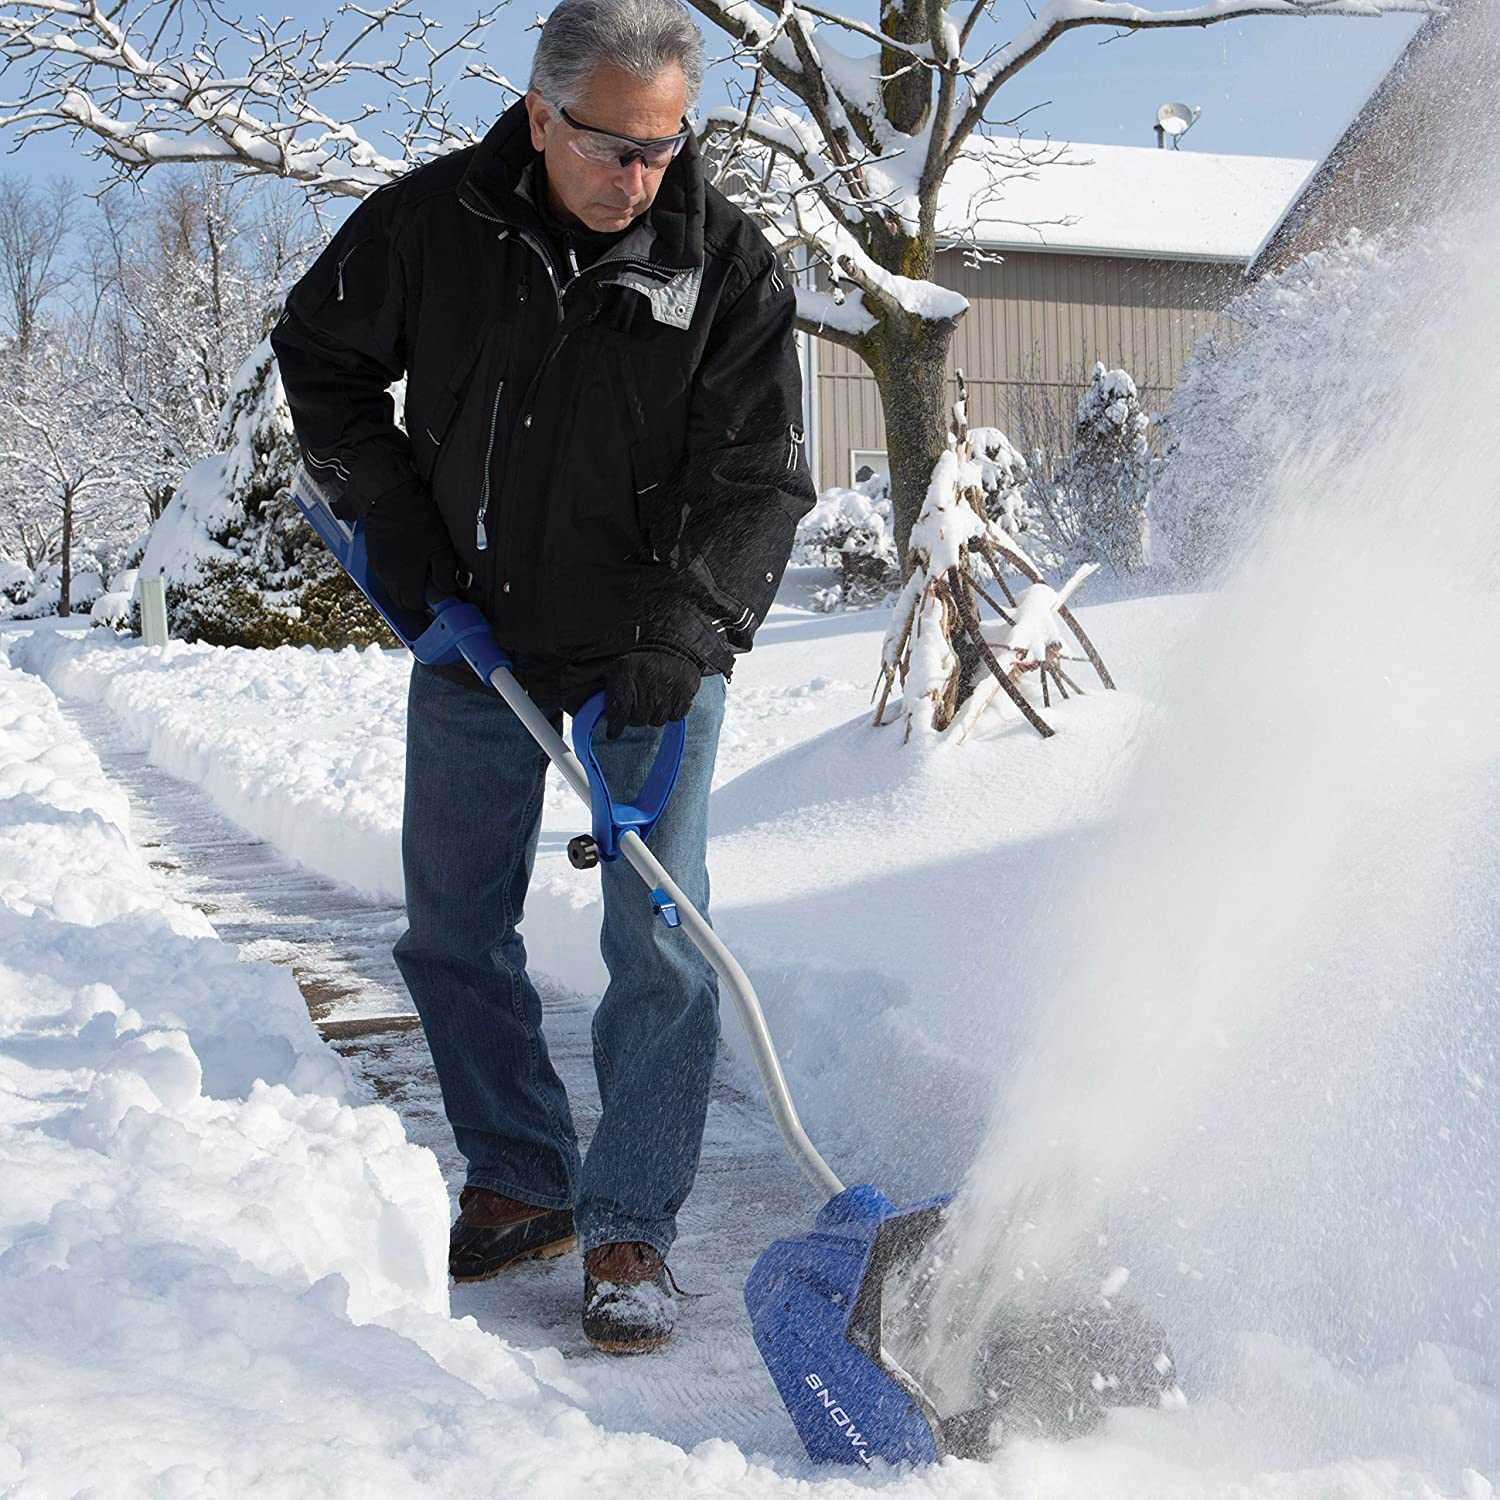 Snow Joe Cordless Snow Blowing Snow Shovel In Action - Best Christmas Gifts For Dad